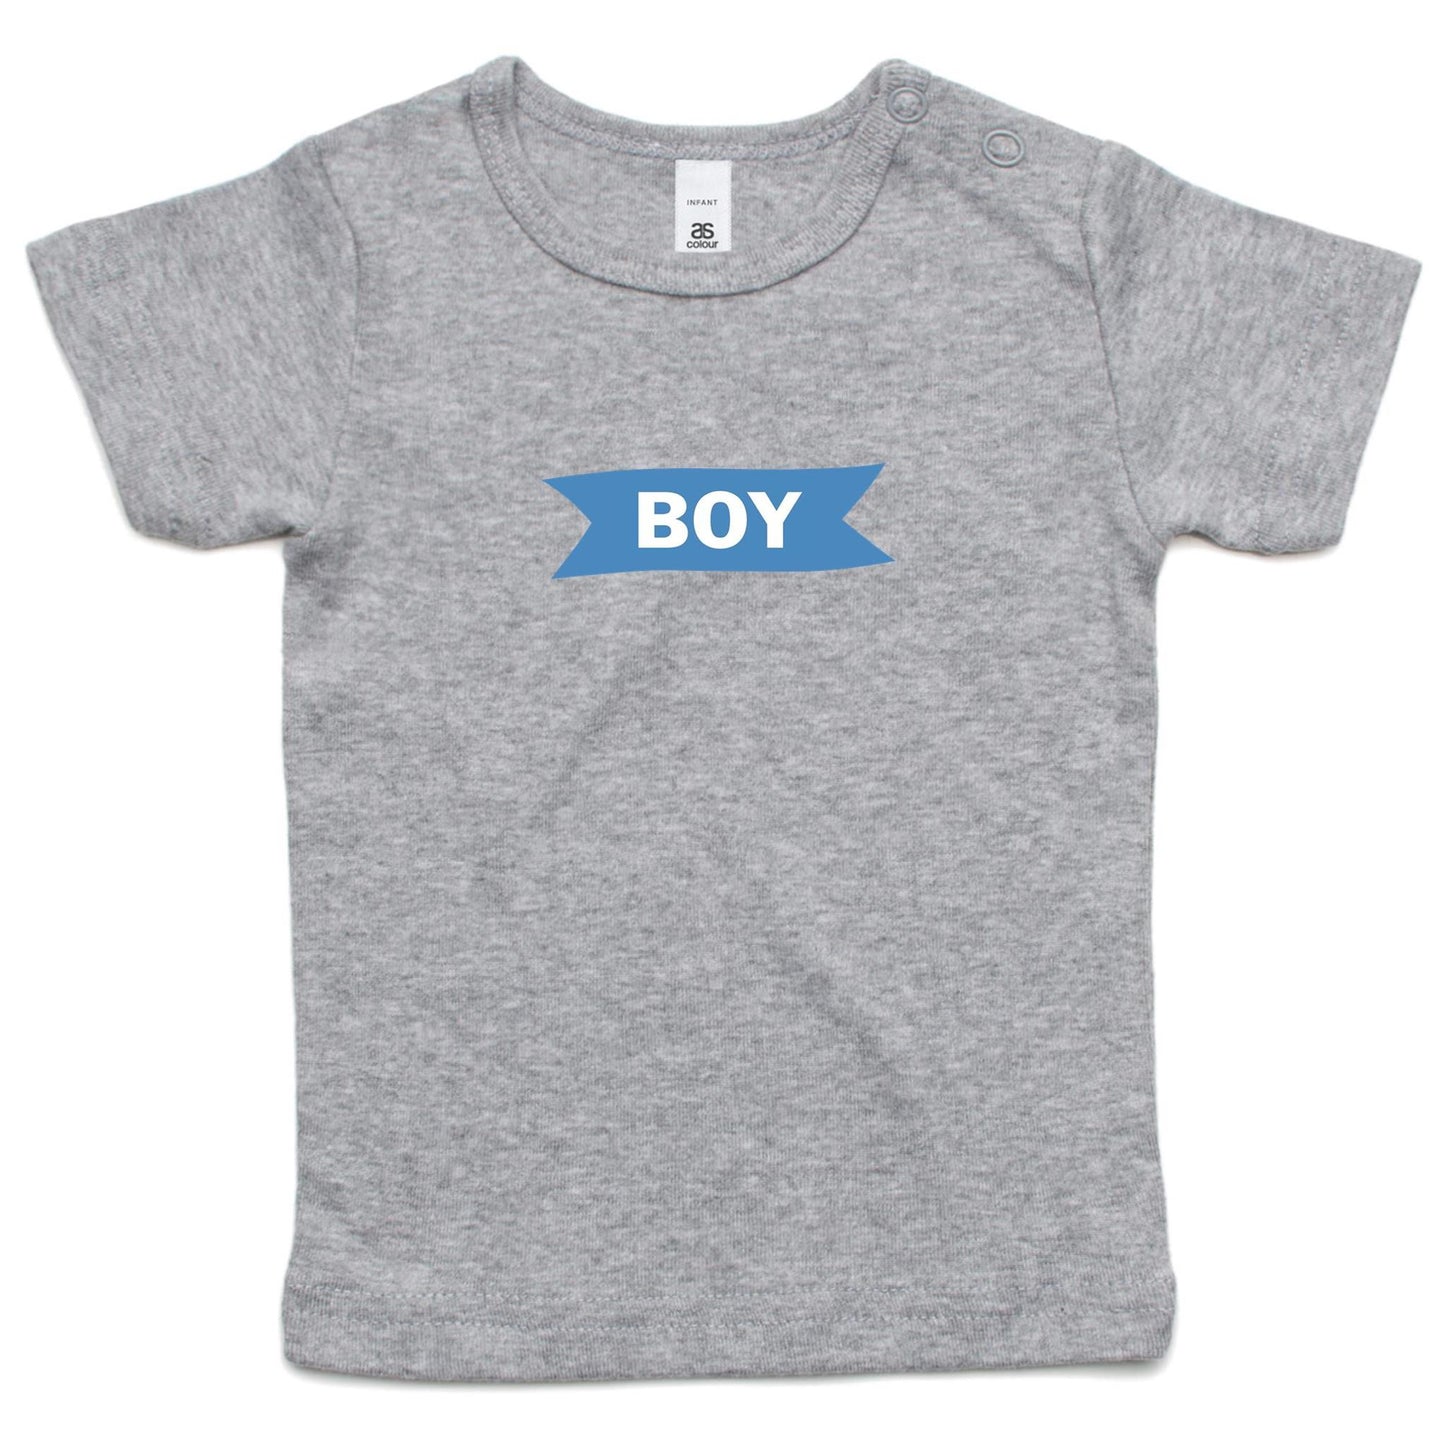 Boy T Shirts for Babies